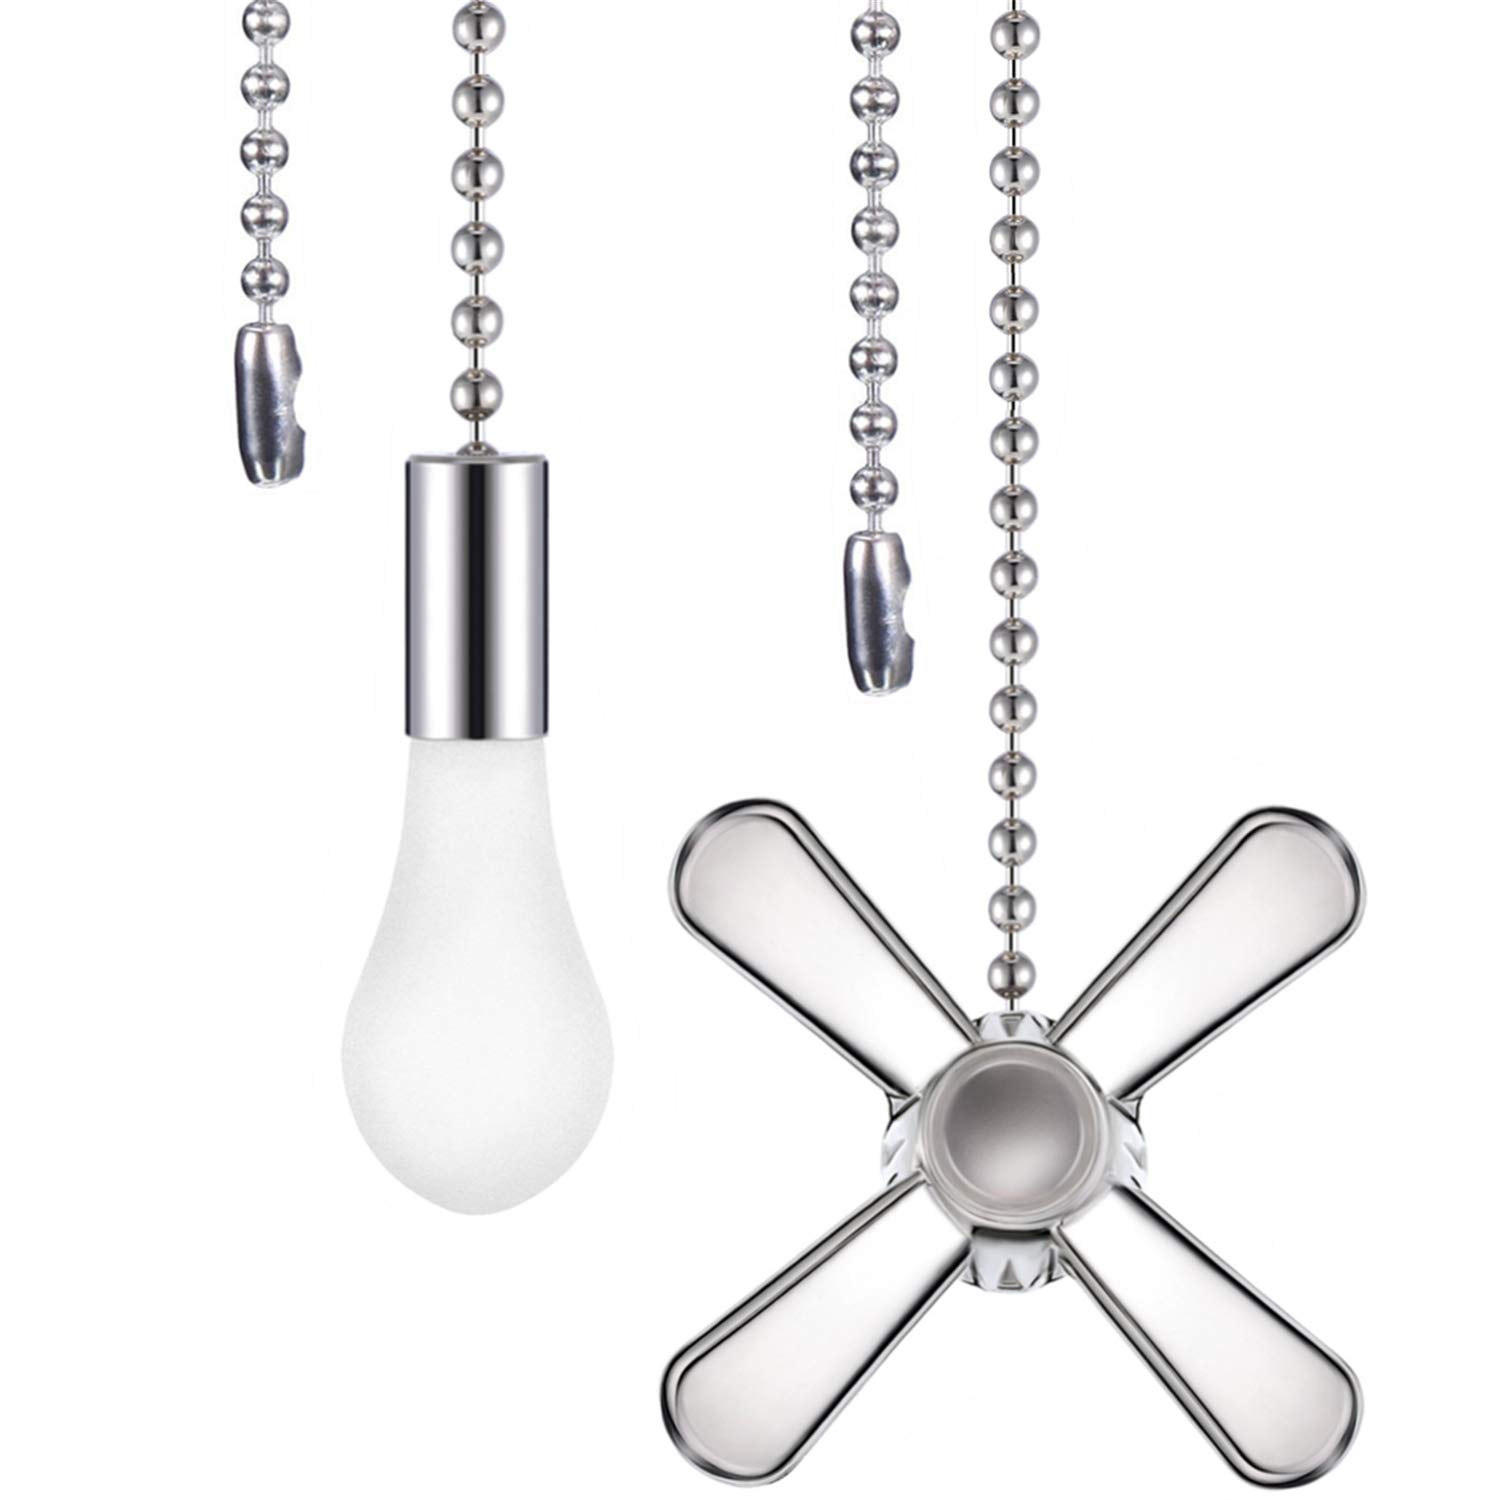 Tatuo 2 Pieces Metal Fan and Light Bulb Shaped Pull chain Set with connector, 1 Piece Length Extension Beaded Pull chain in Box (Silve